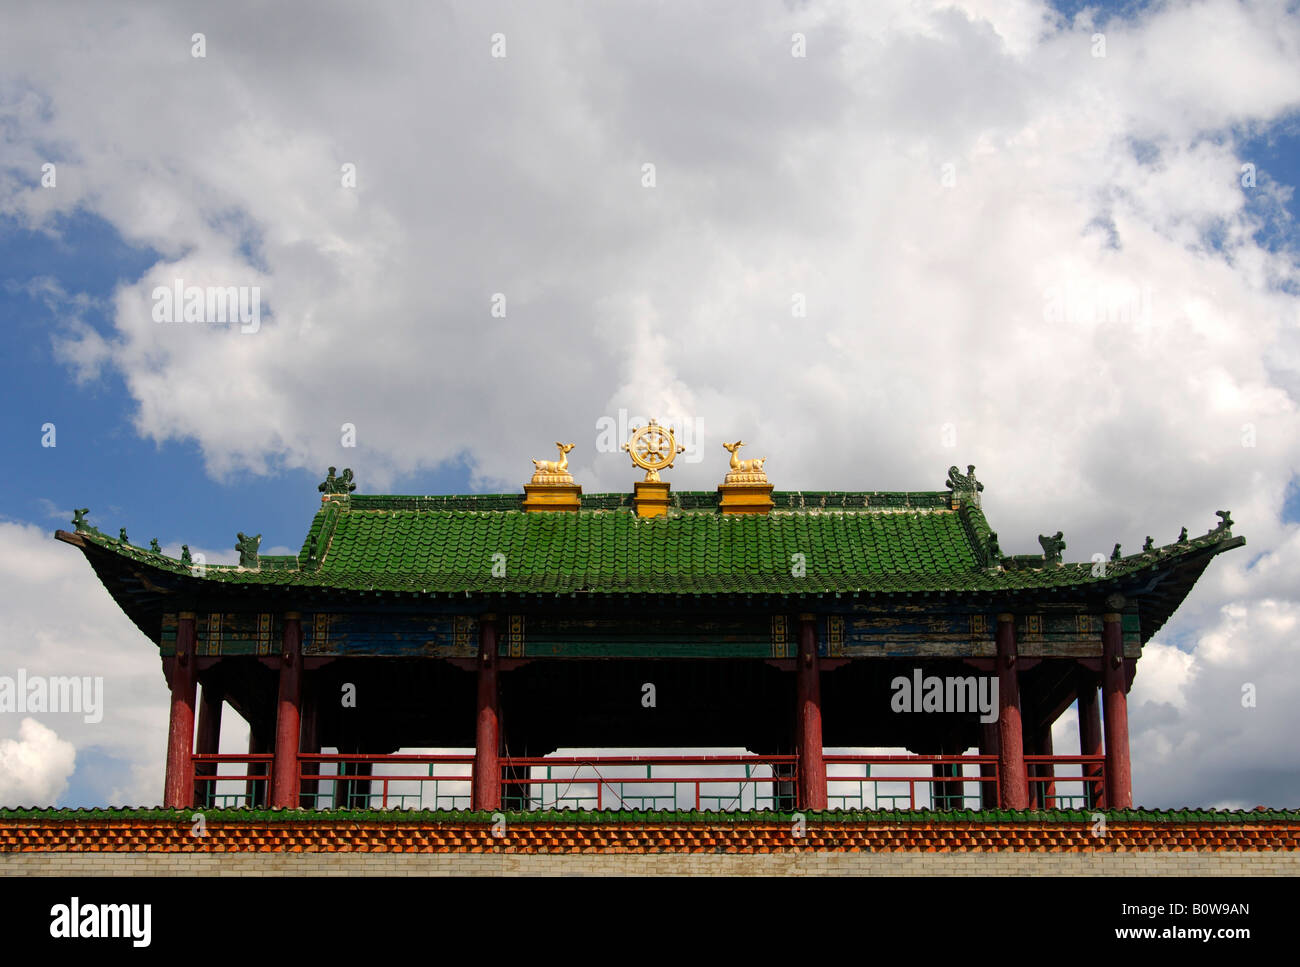 Roof of the Mongolia Hotel in the style of a Tibetan Buddhist temple, Ulan Bator or Ulaanbaatar, Mongolia, Asia Stock Photo